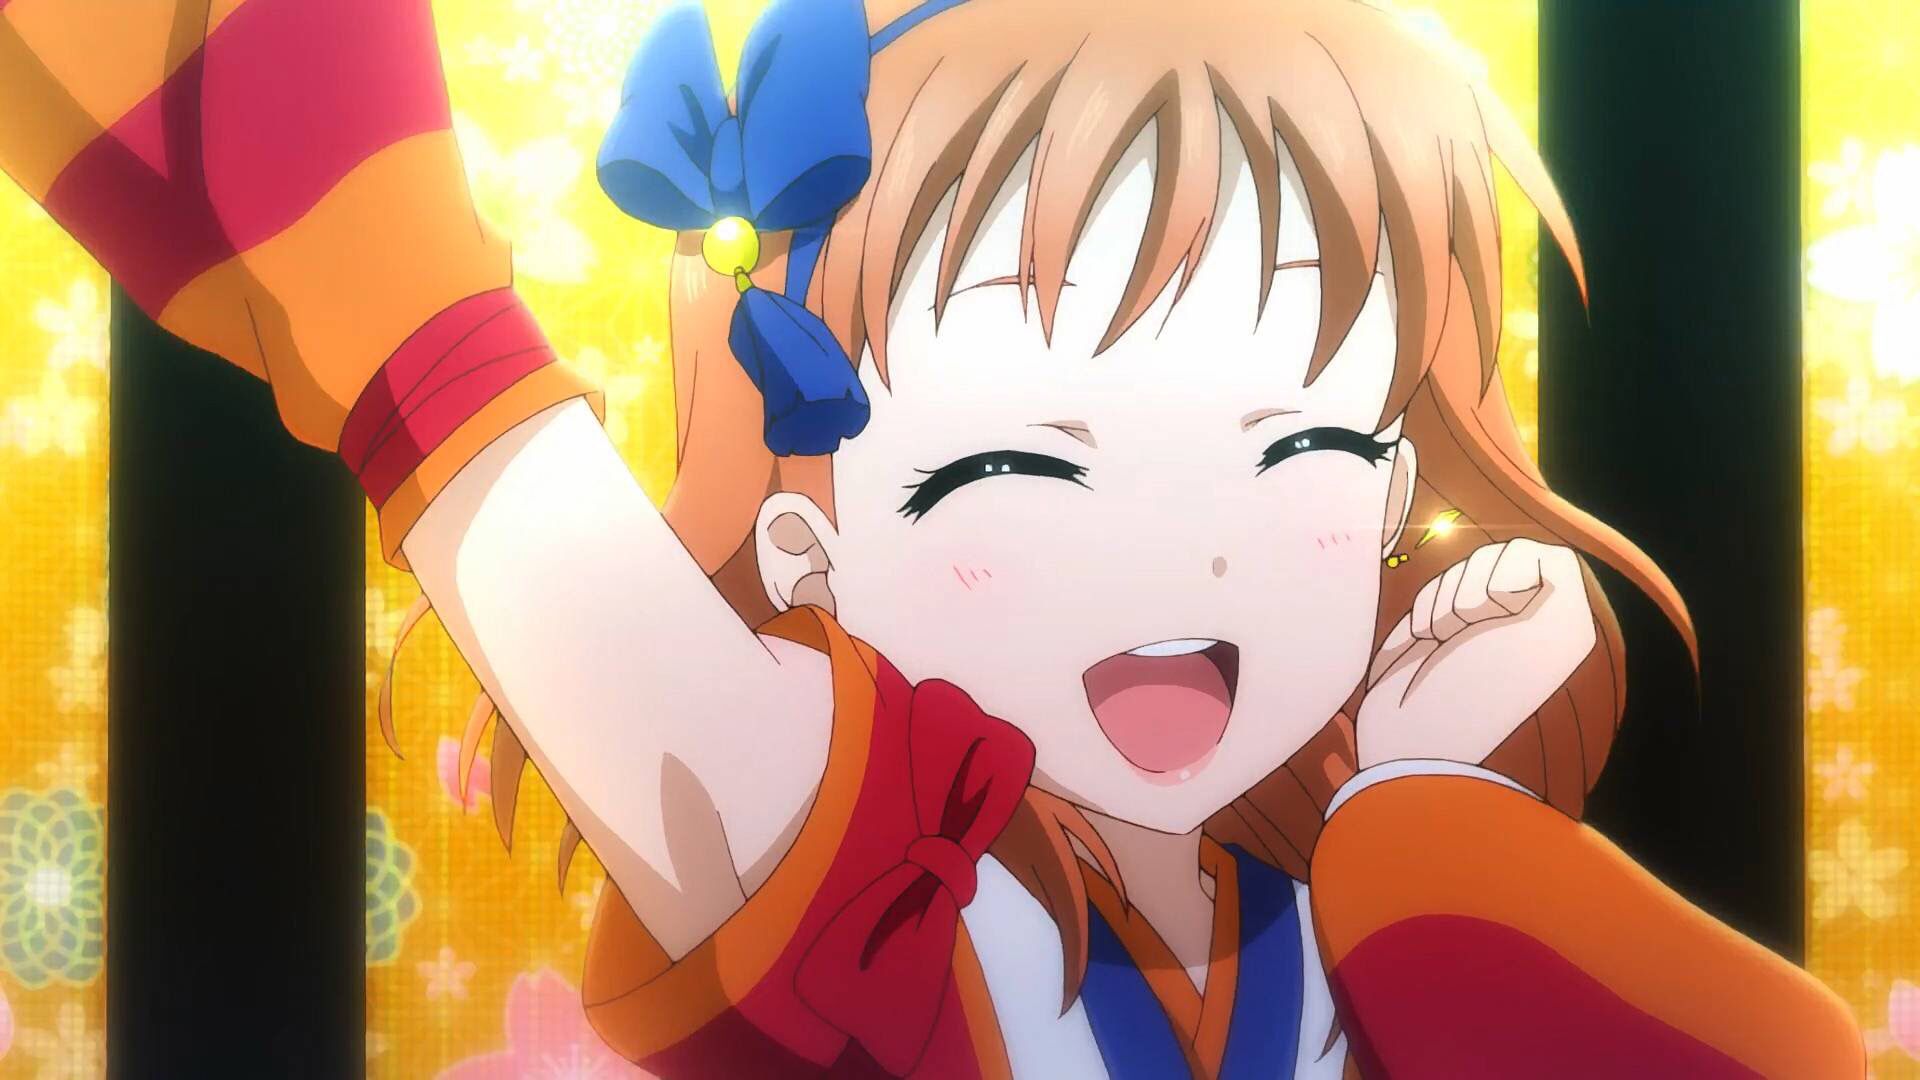 [Image] "love live! Sunshine "1000 songs she bend was its cute scene image competitions wwwwwwwwww 8